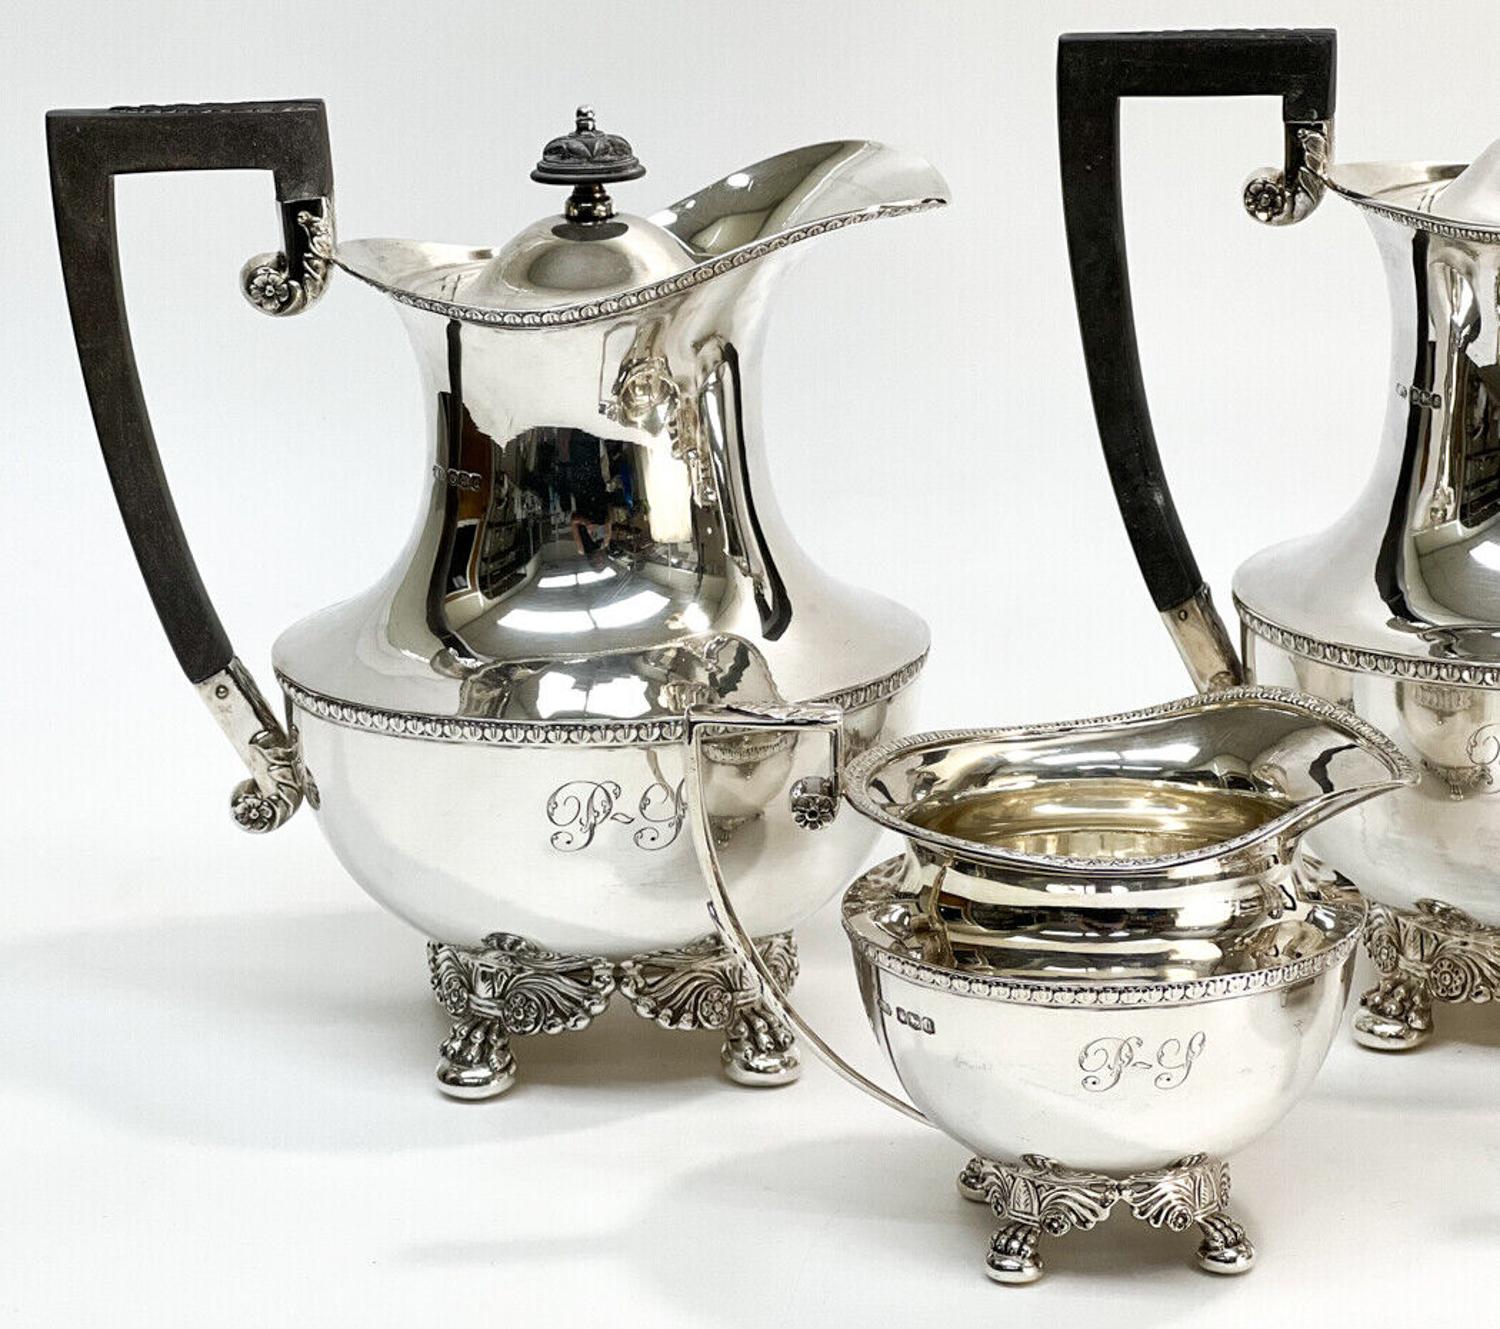 5 piece English sterling silver tea set Fattorini & Sons Ltd Sheffield, 1921. . Hand chased rim with leaves to the handle. Fattorini & Sons sterling silver hallmarks. The feet taking the form of winged claws, the wood nicely engraved acanthus. The